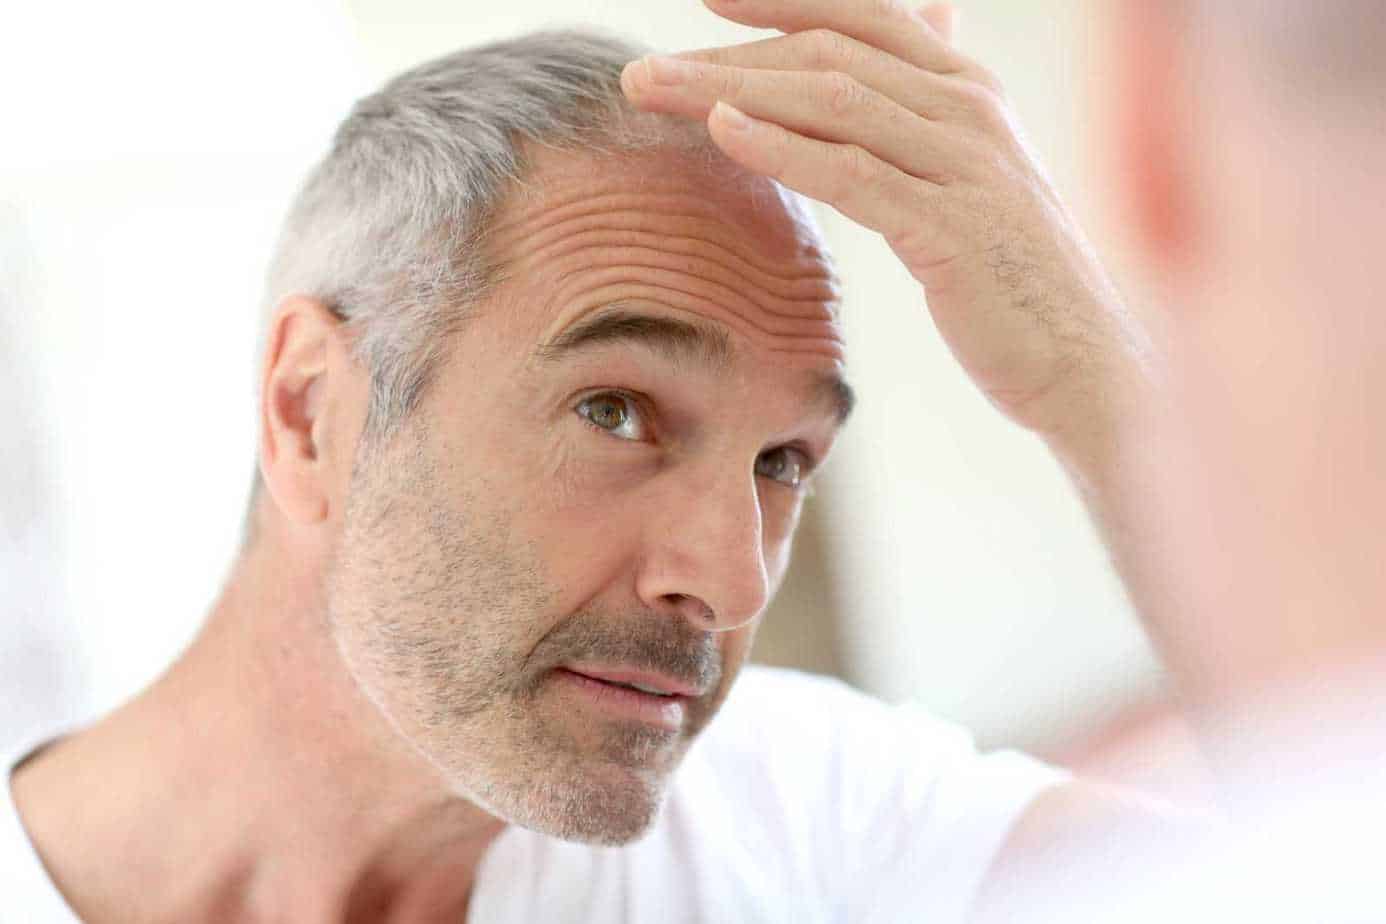 Hair loss after hair transplants – Do you need another treatment?